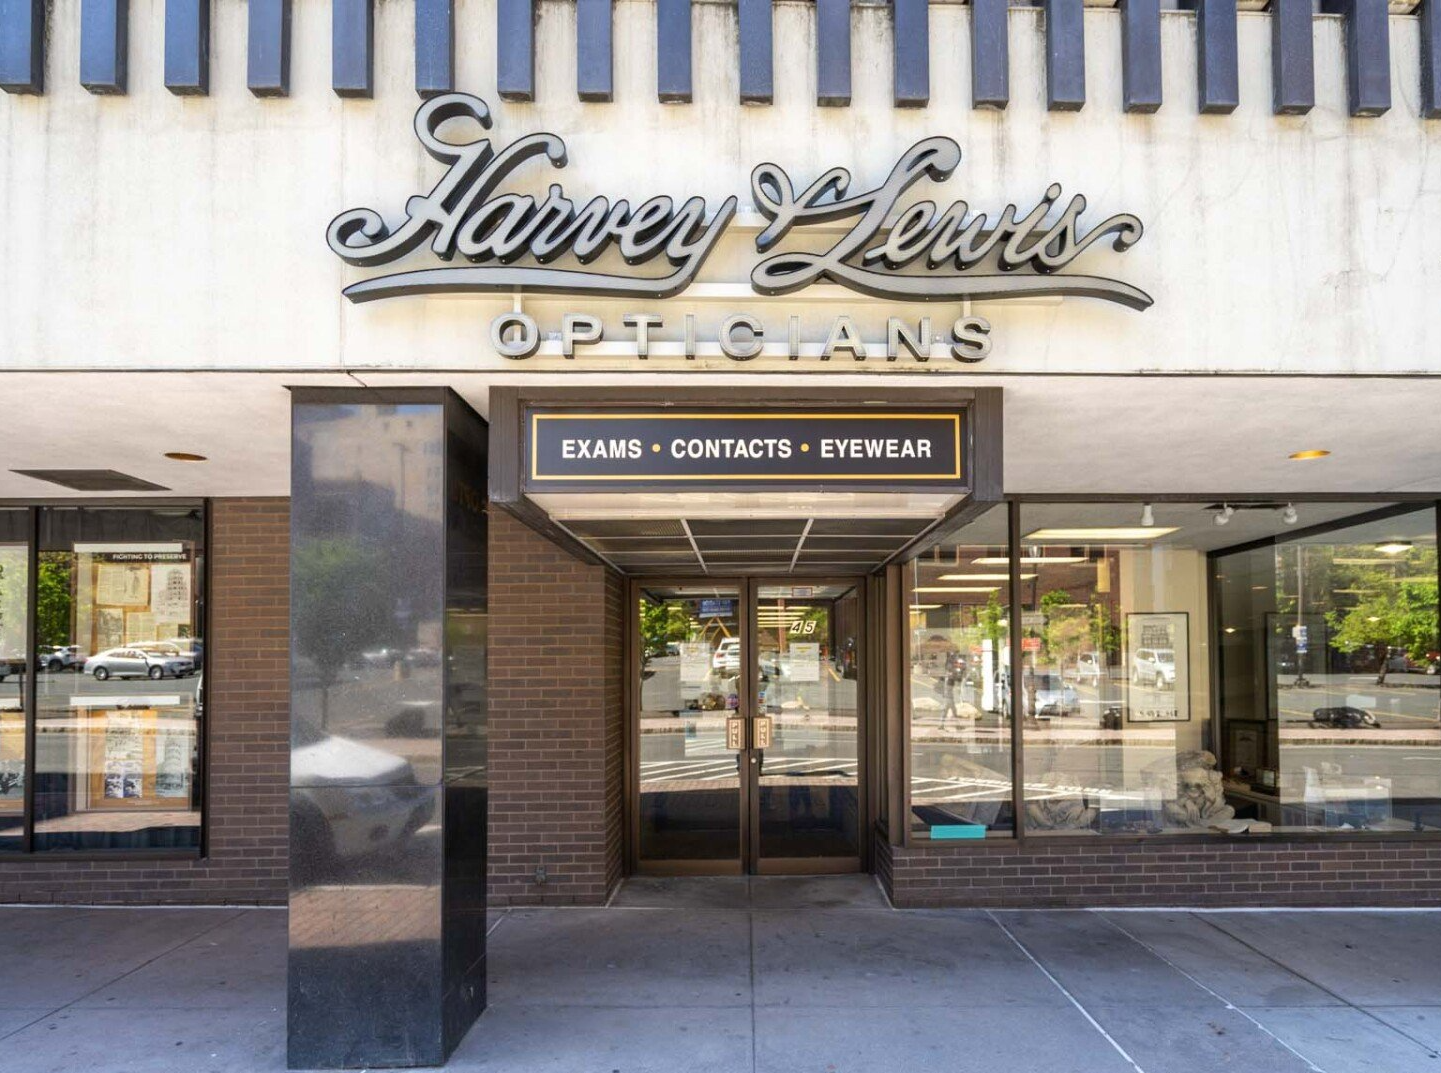 Harvey and Lewis Opticians in Connecticut